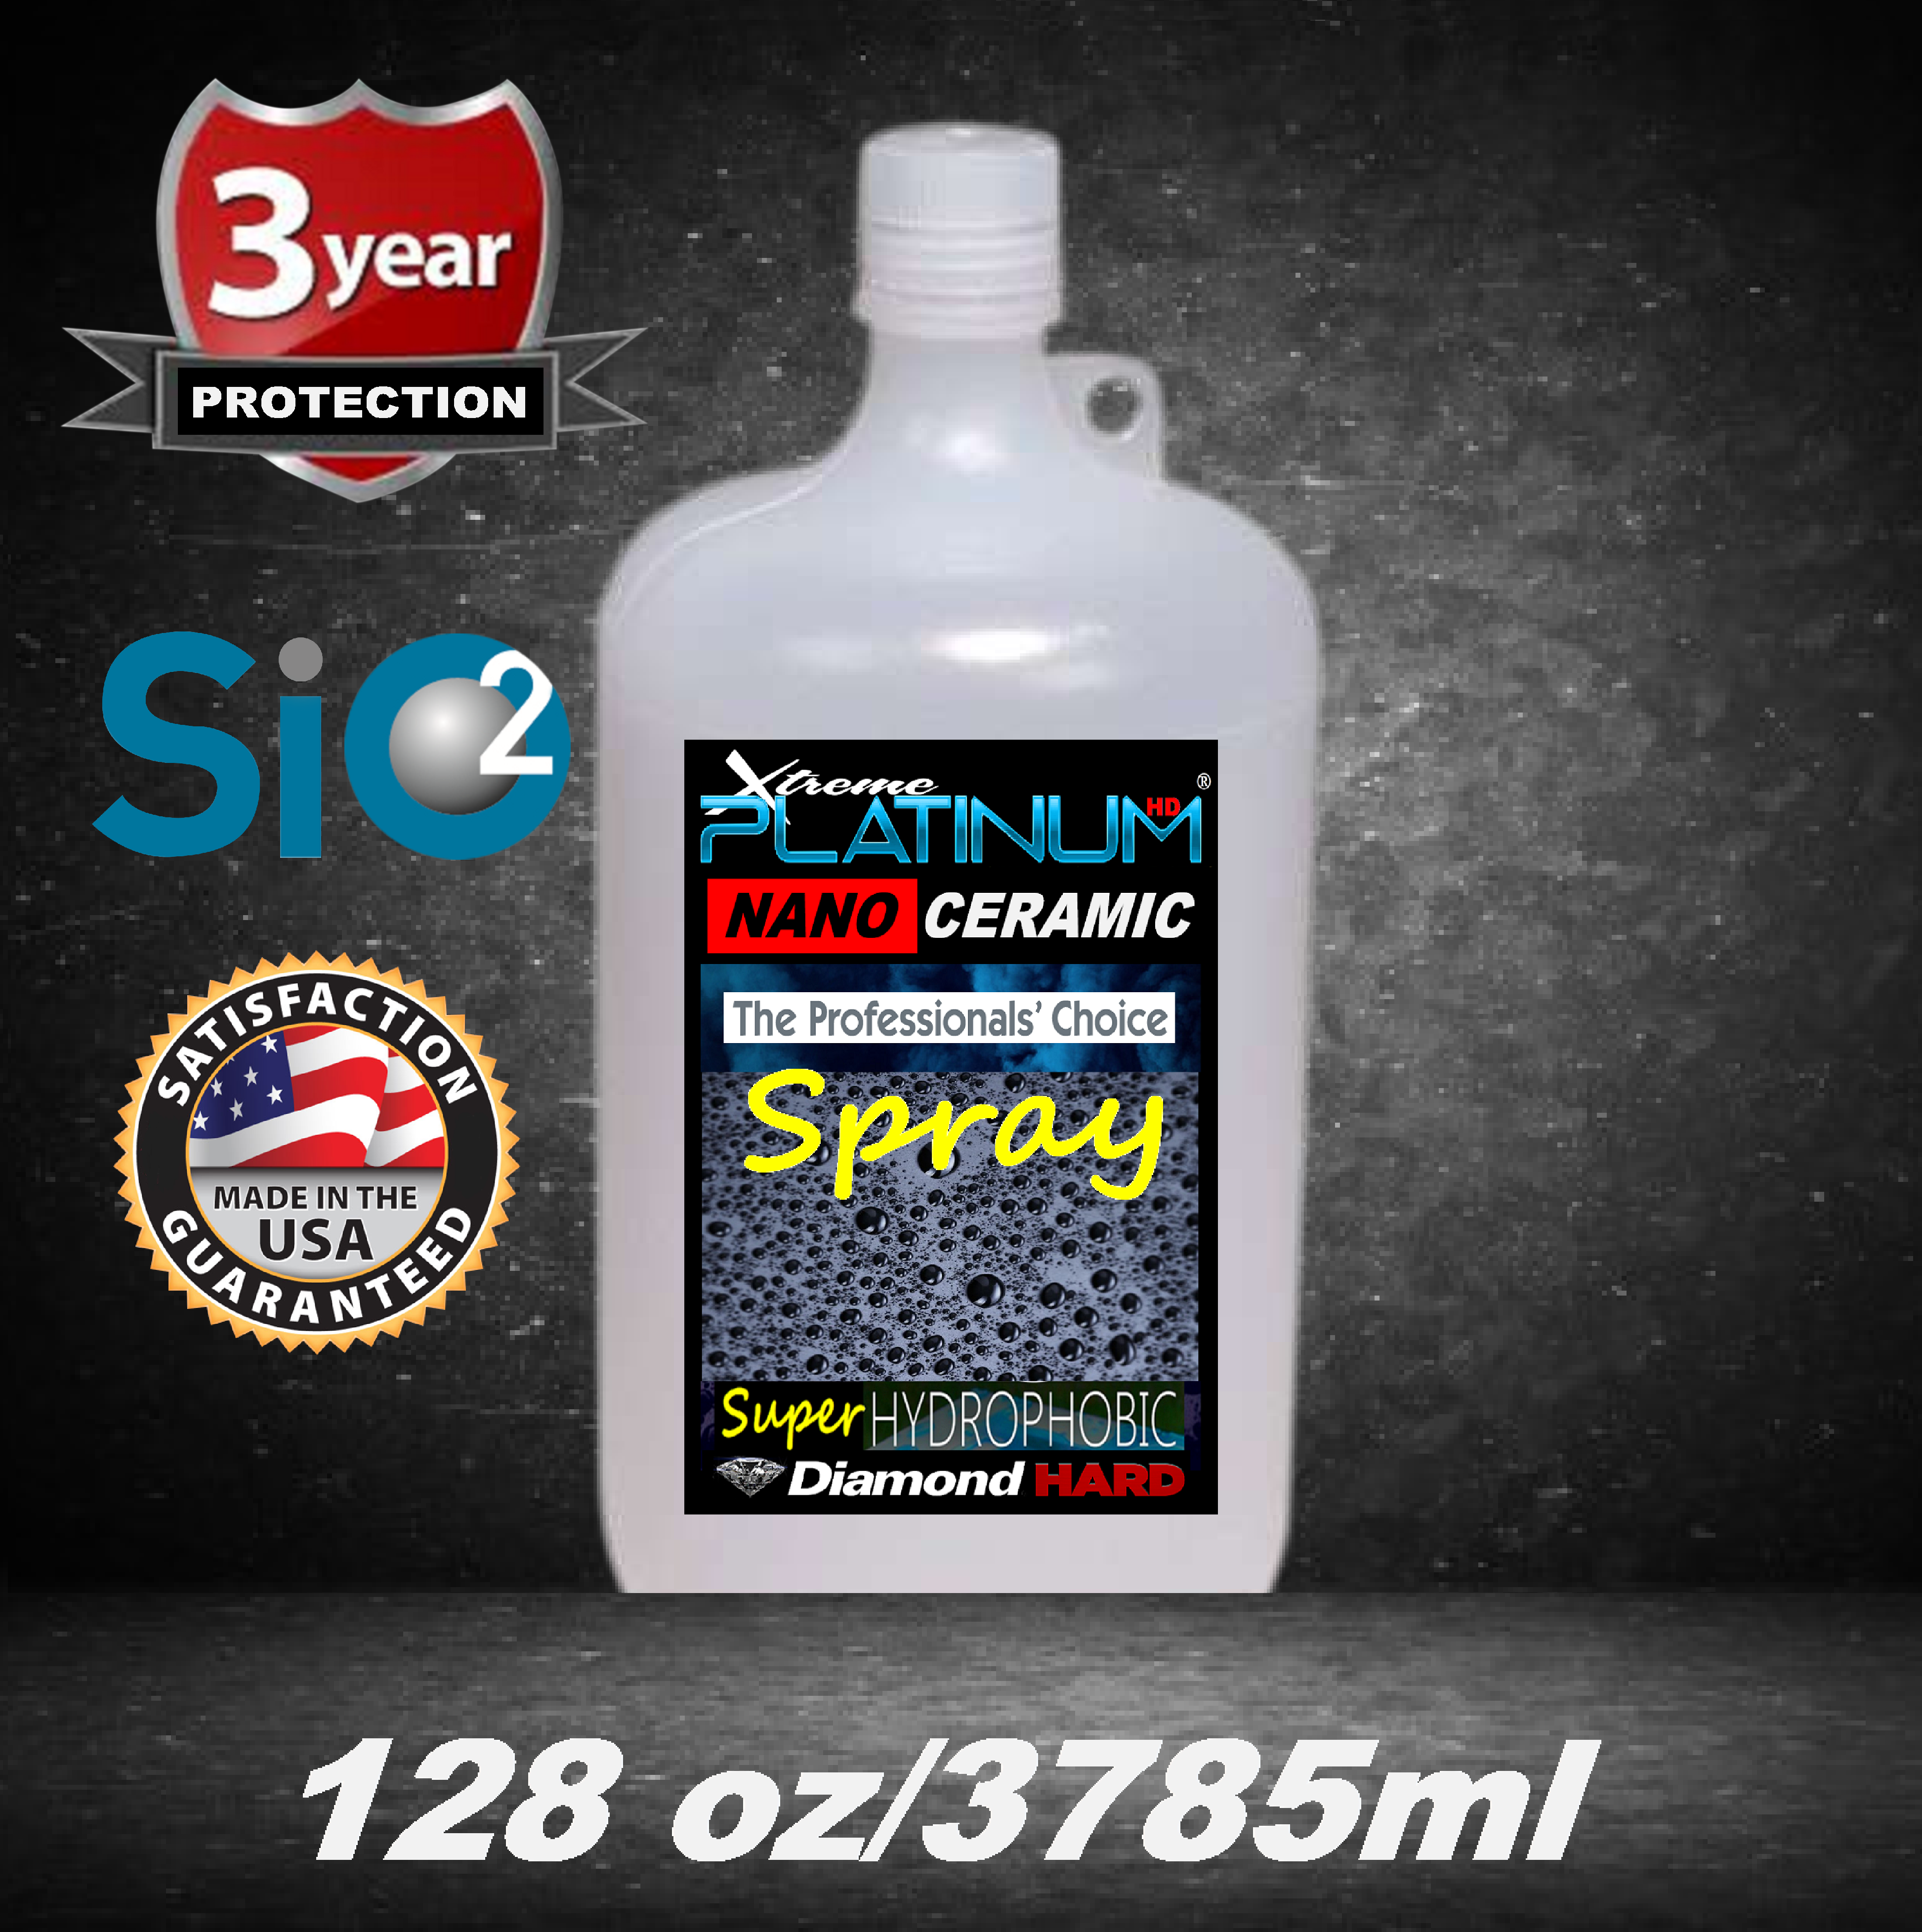 CERAMIC CAR COATING SPRAY 9H SCRATCH RESISTANT 3 YEAR PROTECTION HIGH GLOSS  -KIT